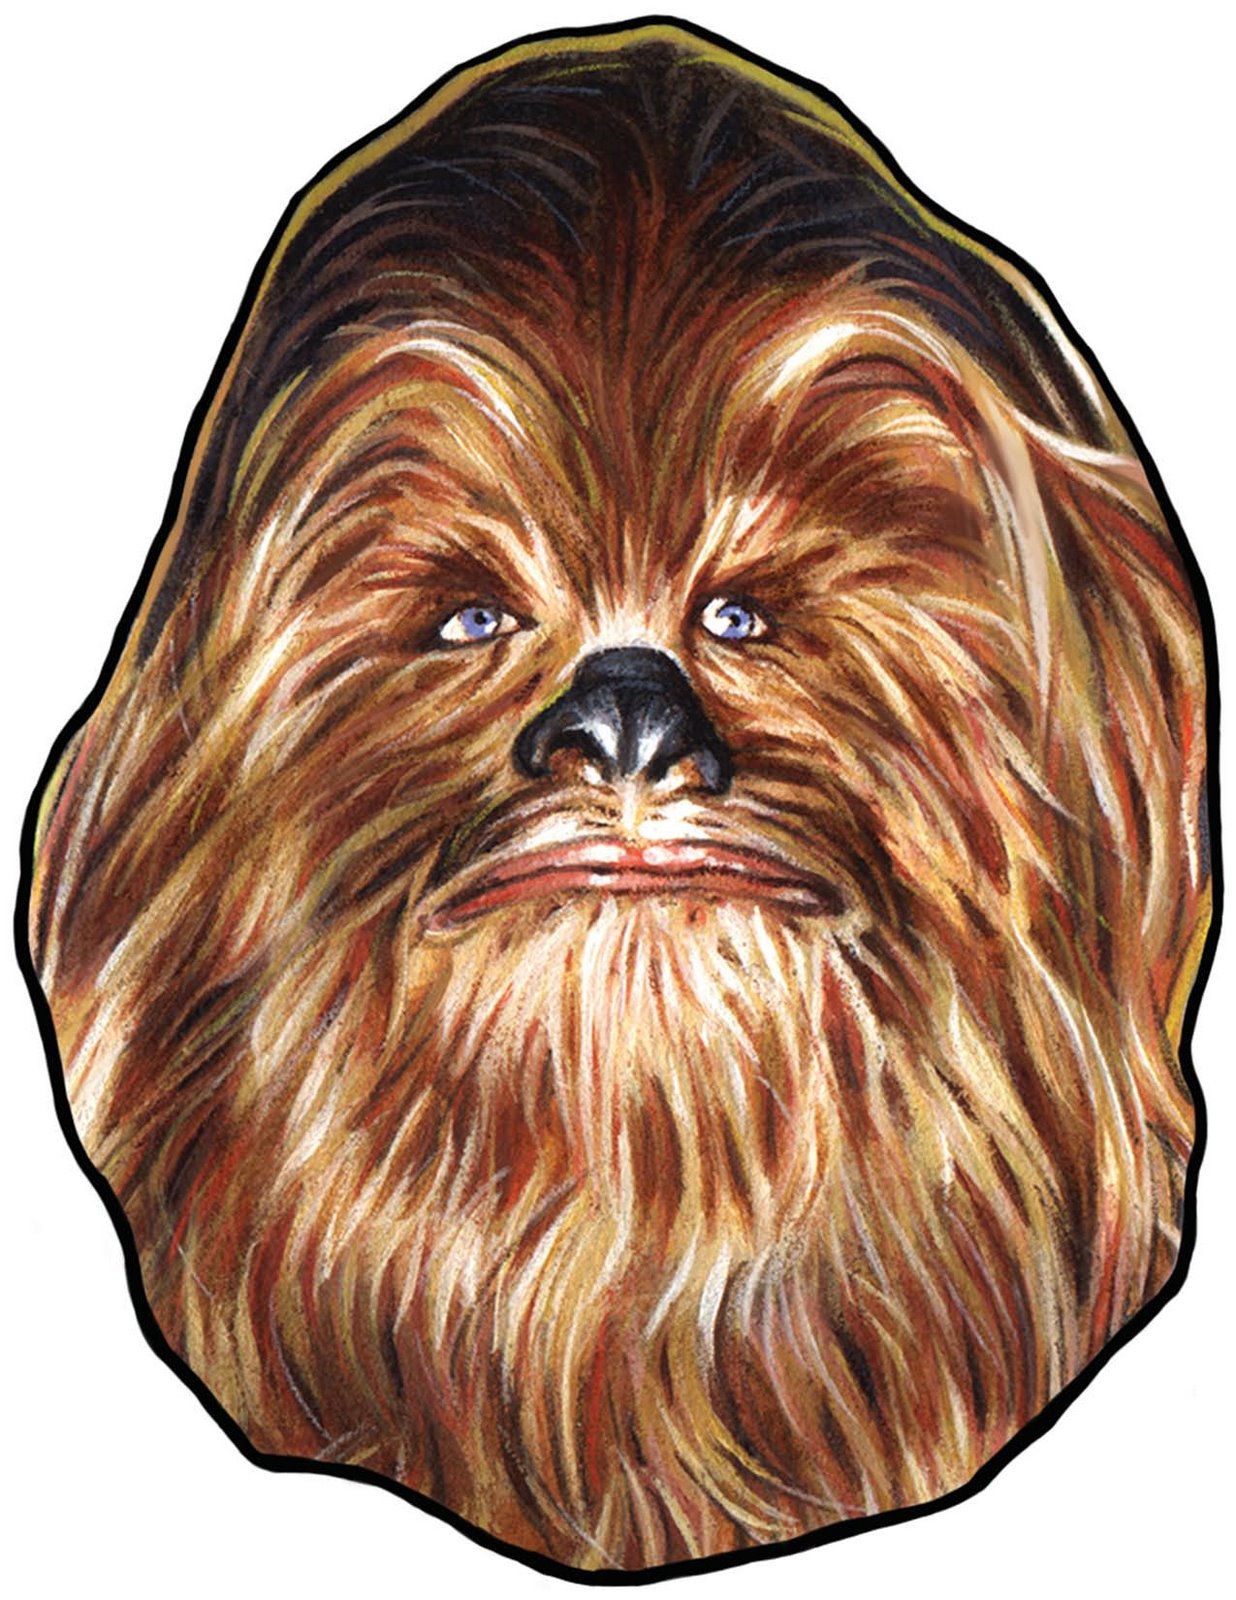 7 Best Images of Chewbacca Star Wars Printable Masks - Star Wars ...
